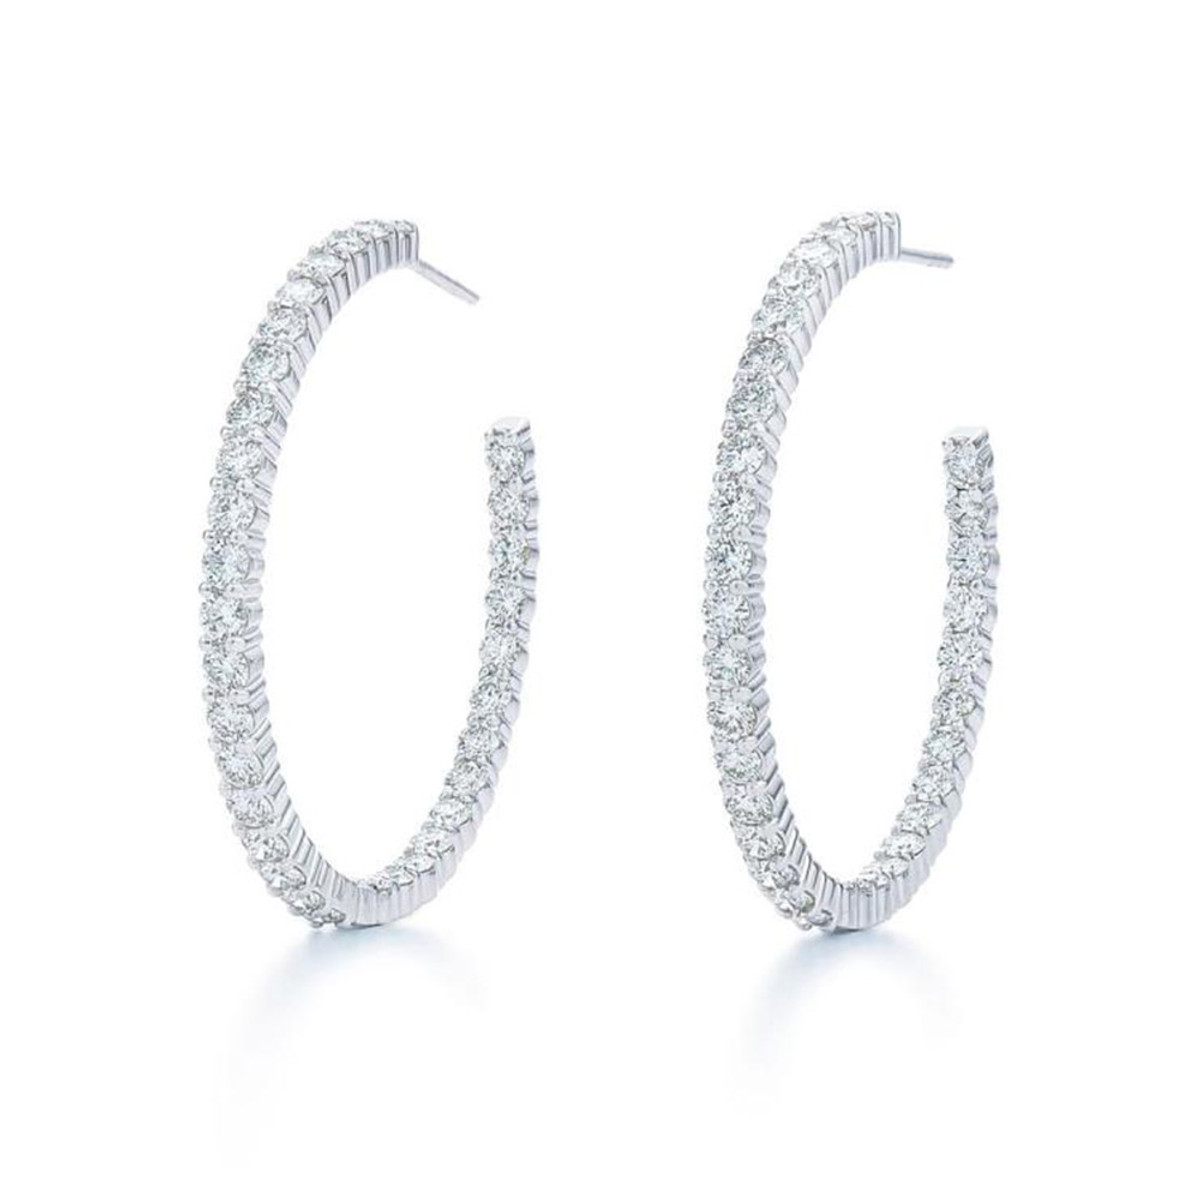 Kwiat 18K White Gold In-Out HoopDiamond Earrings-DEOCF3077 Product Image